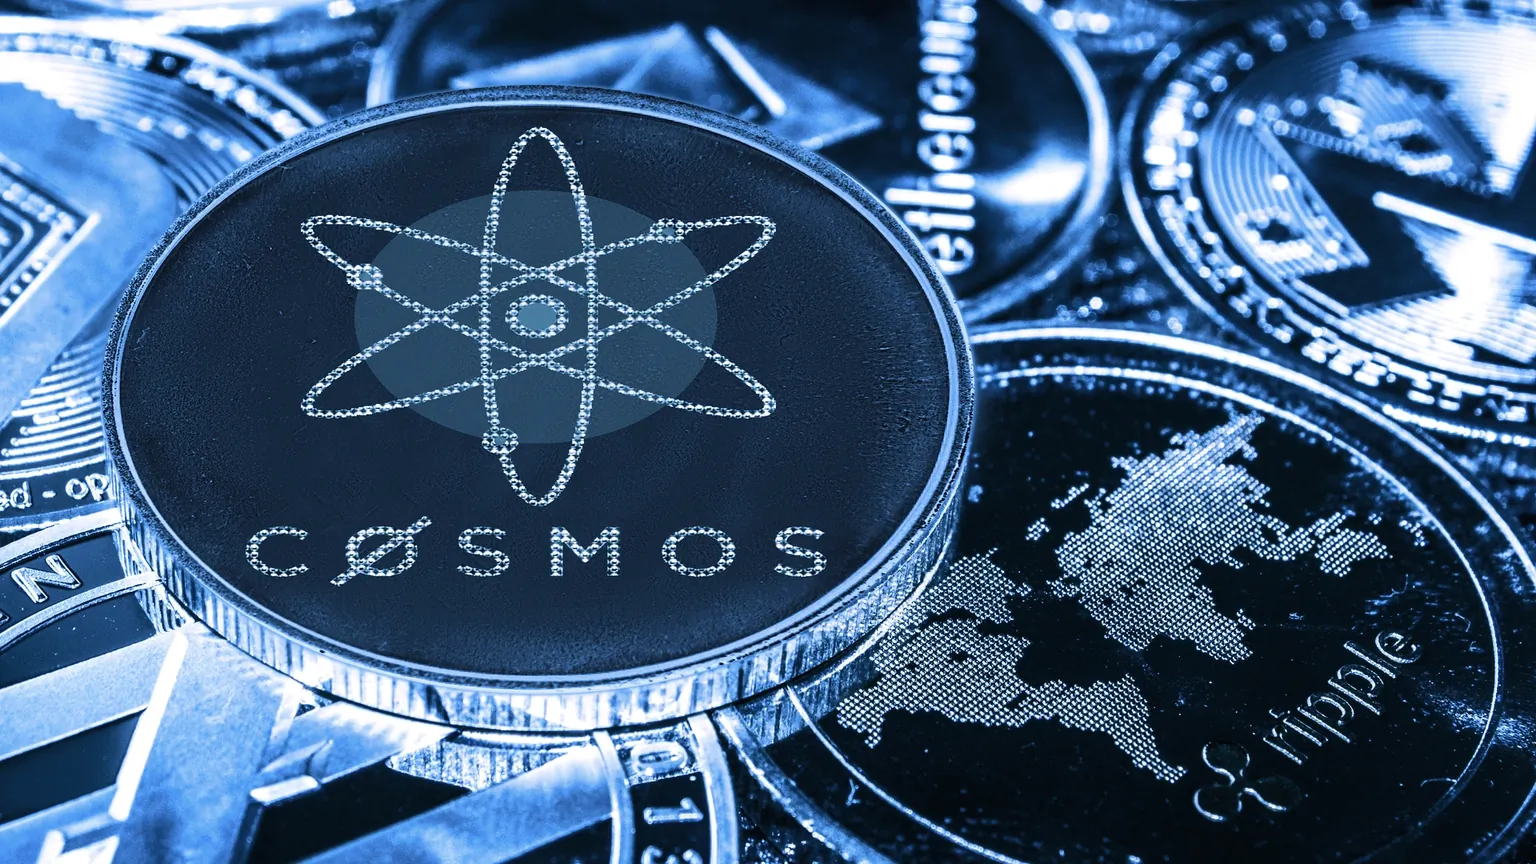 Cosmos is ranked 22 by market cap. Image: Shutterstock.